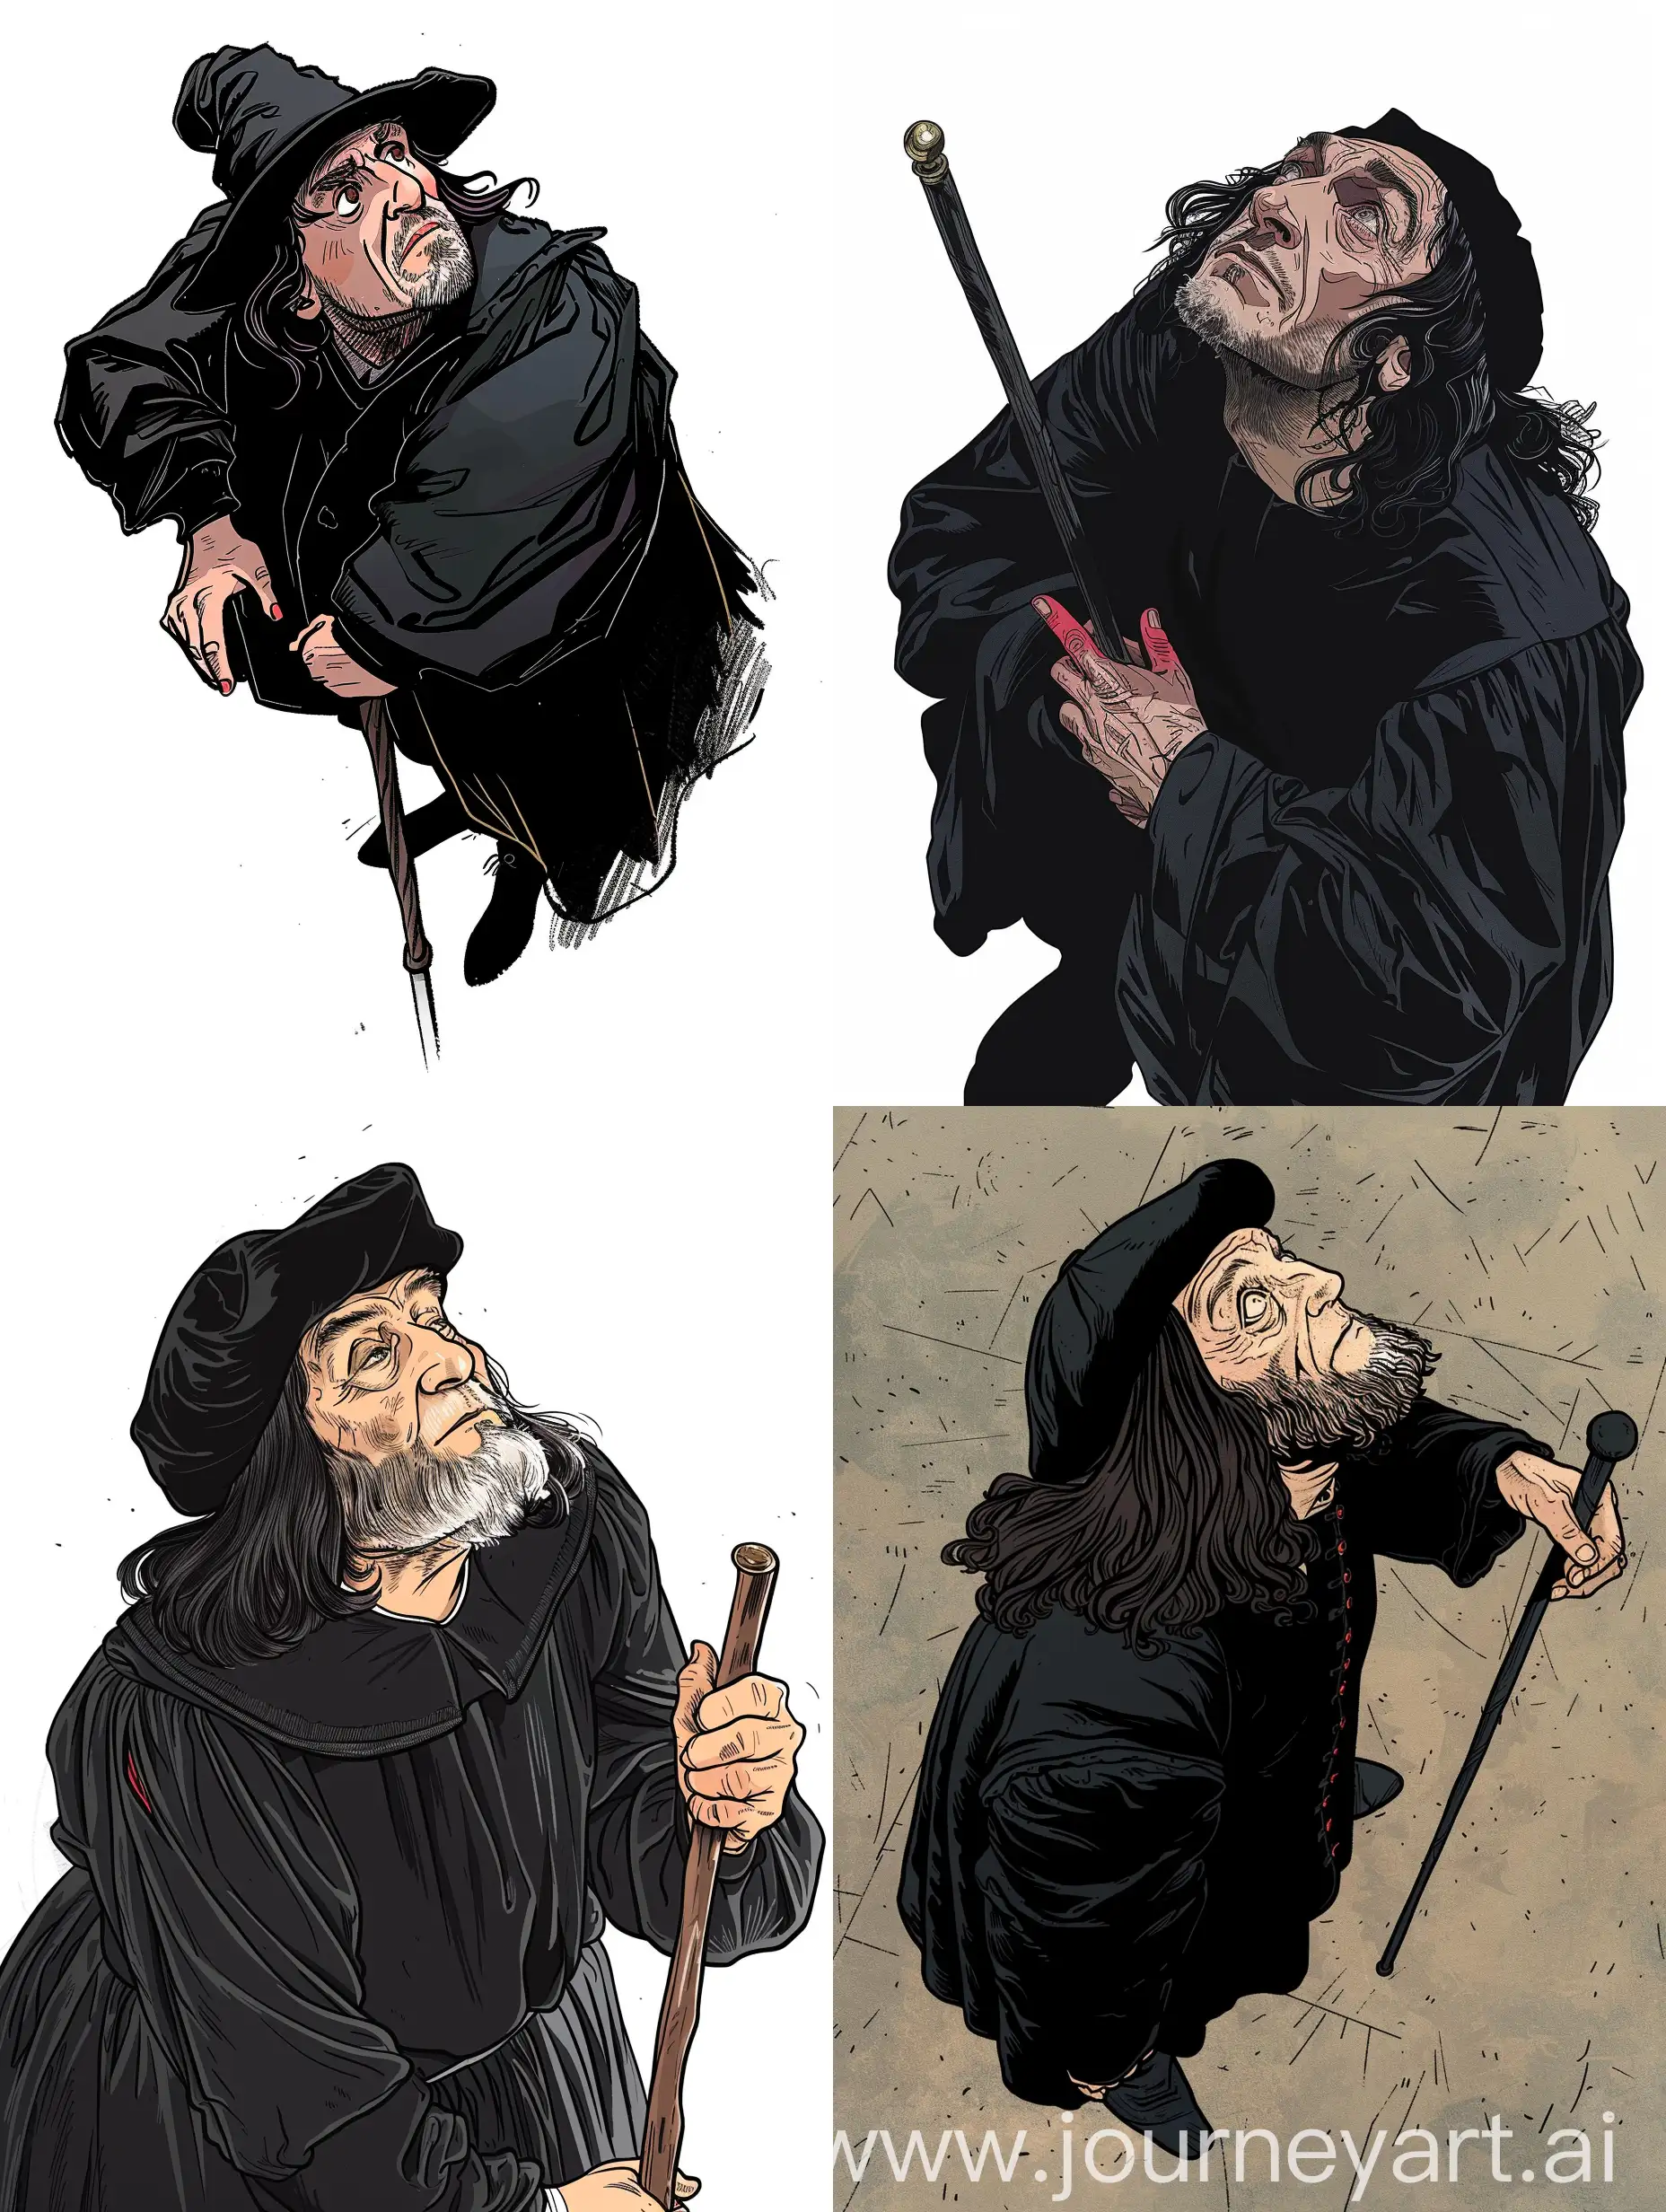 The artist Leonardo Da Vinci looks up, leans with one hand on a cane, cartoon styles, colors black, with small red accents, top view, ink, Herluf Bidstrup style